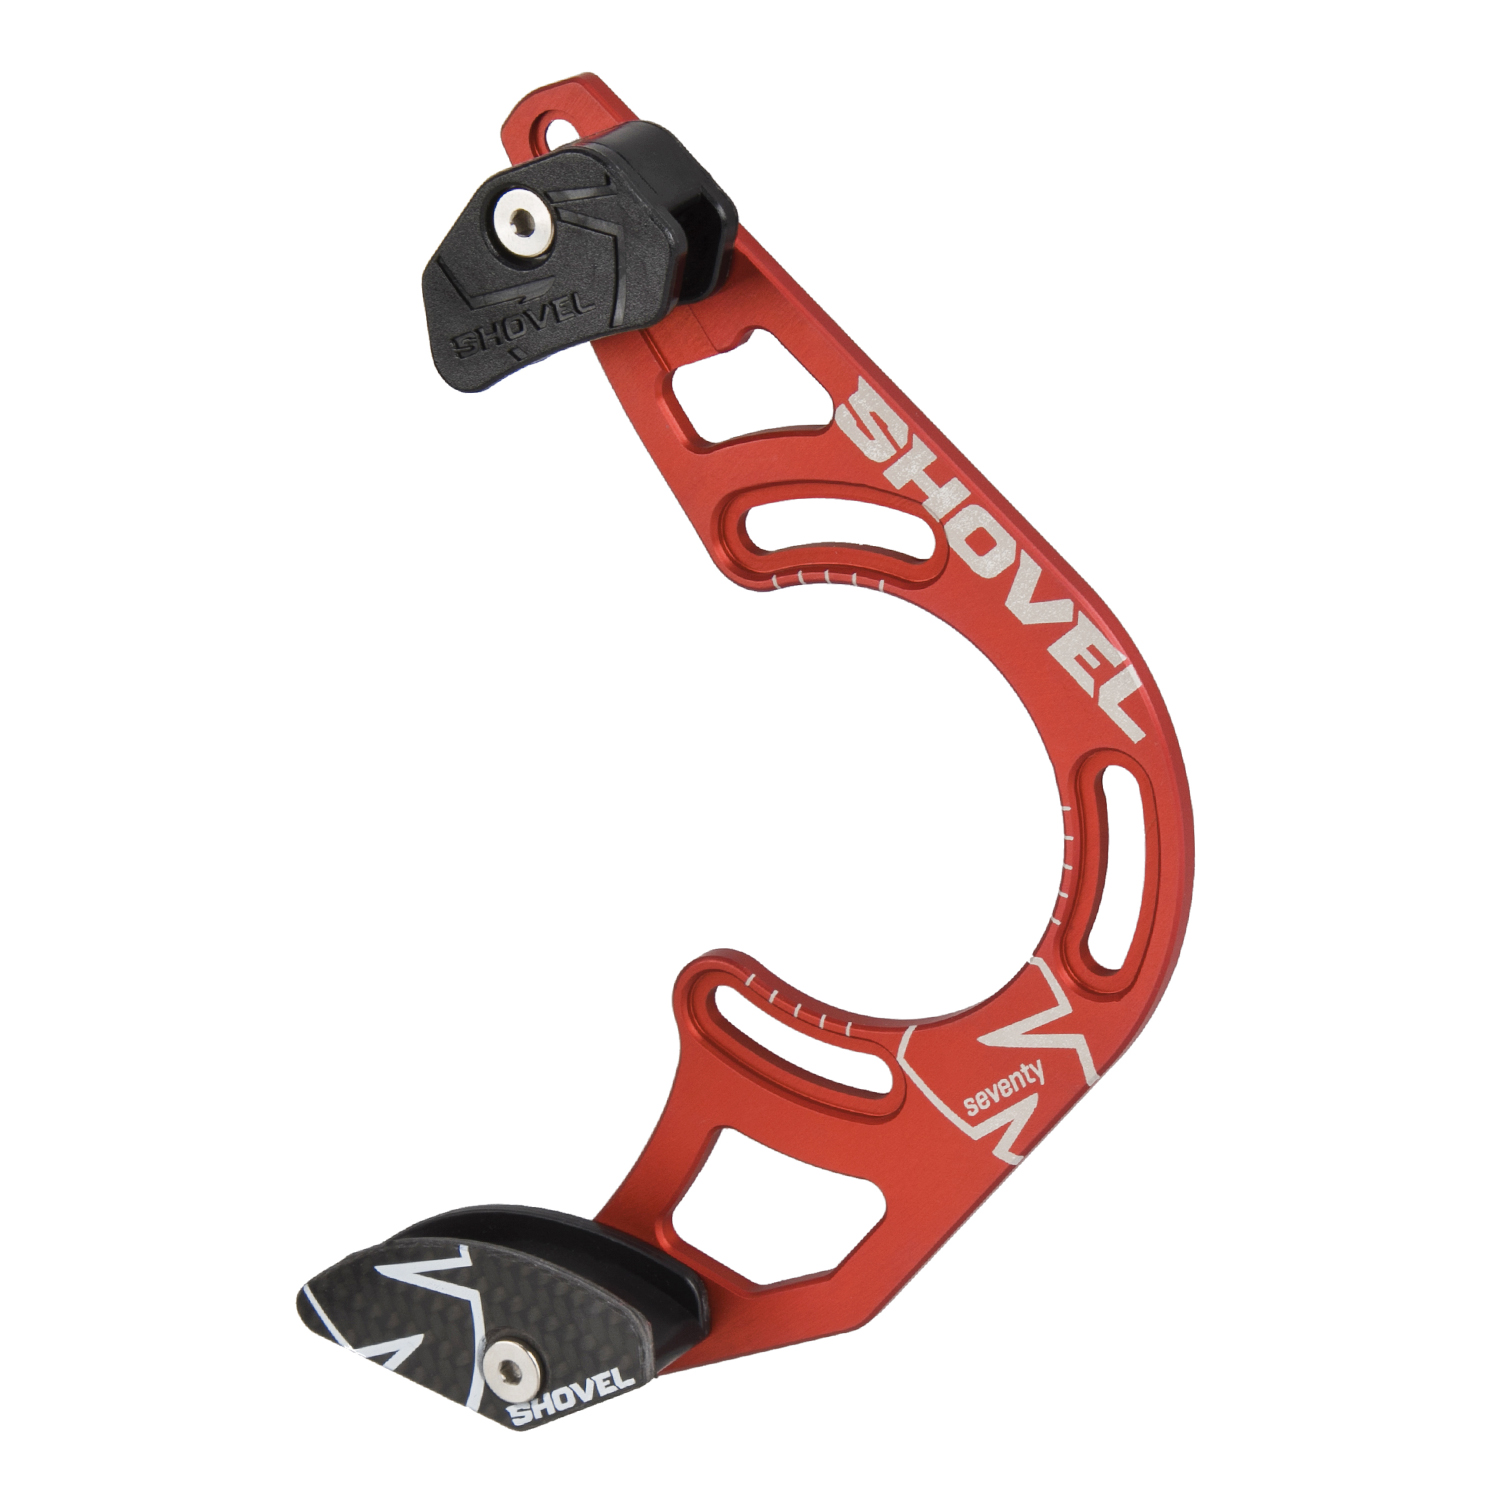 Shovel Chain Guide Seventy Red, 28-36 Teeth, ISCG05